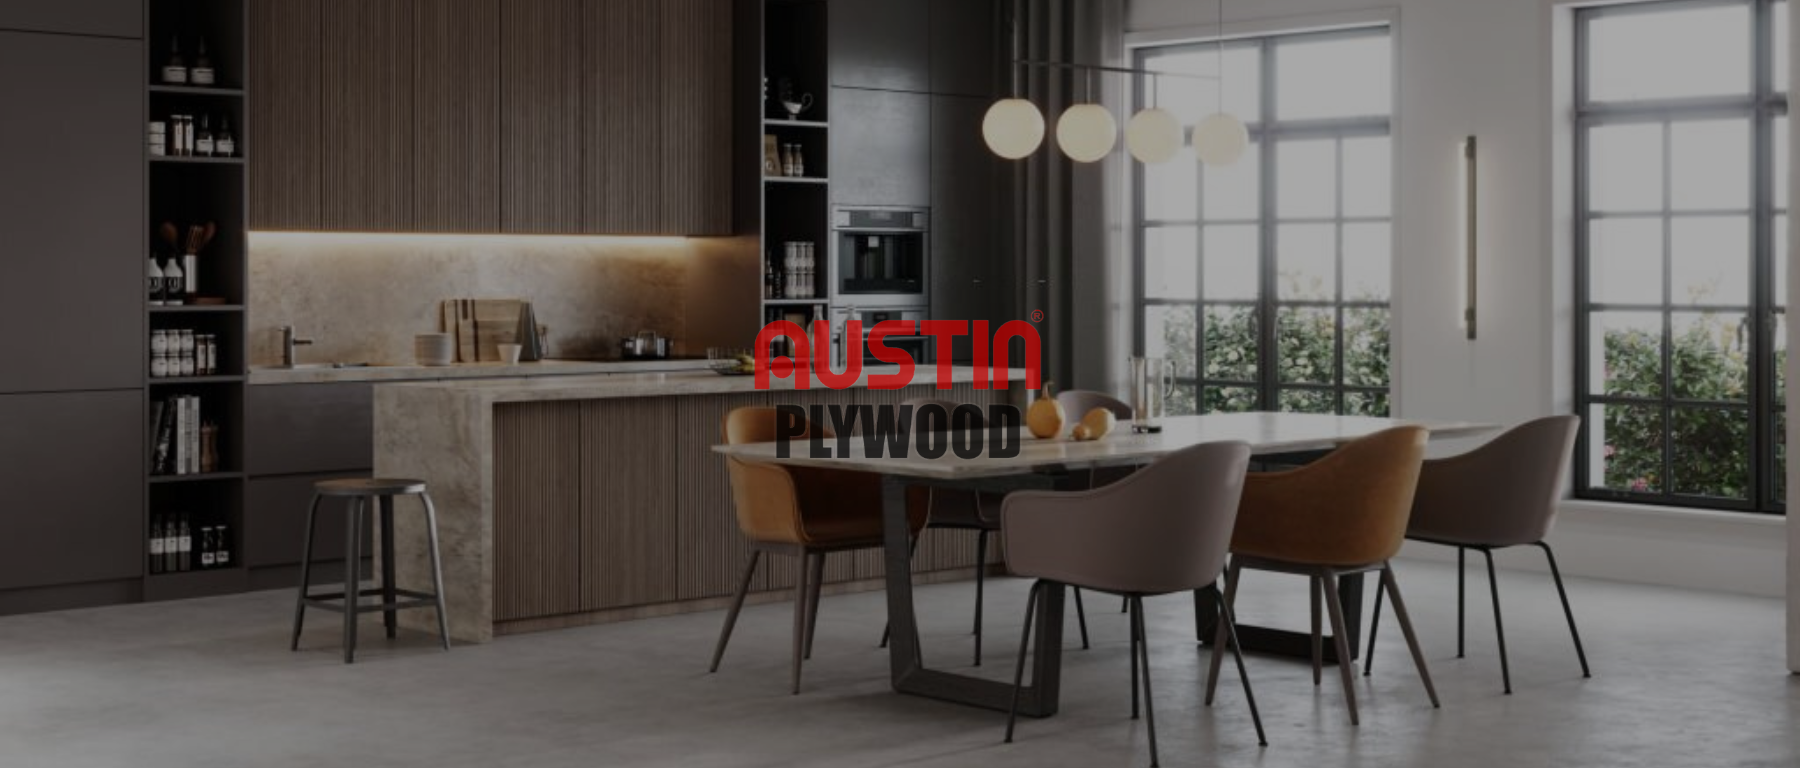 Stay Worry-Free In Your Kitchen With Austin Fire Retardant Plywood | BWR Plywood